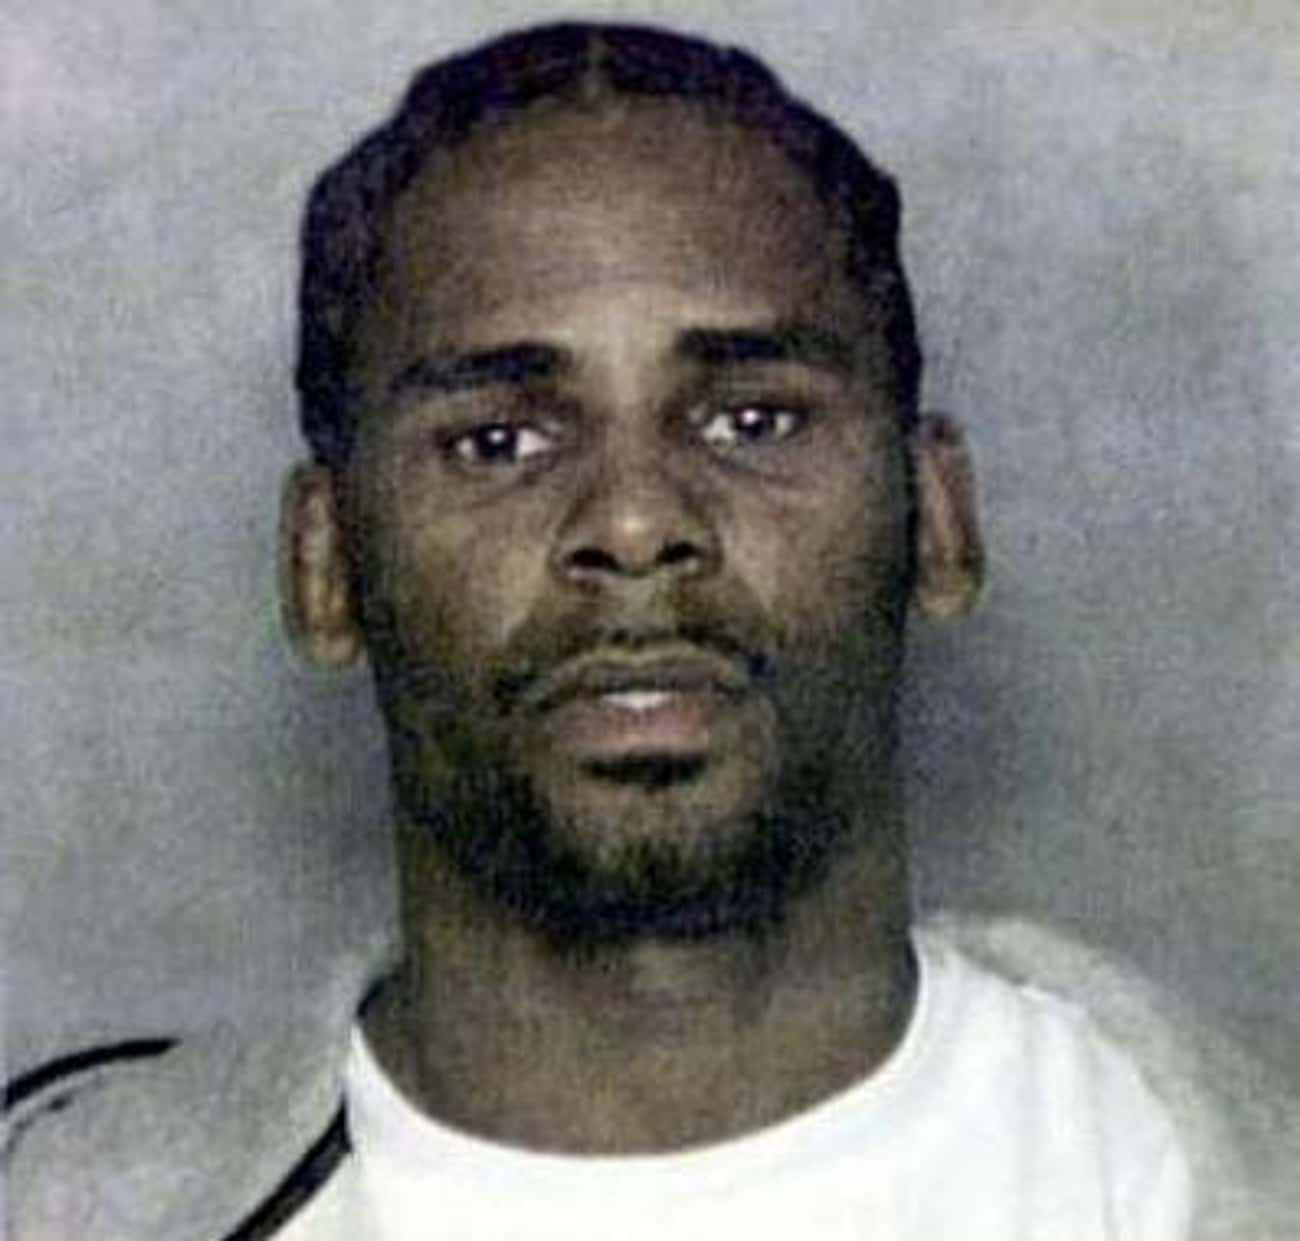 He Was A Witness In R. Kelly's 2008 Explicit Underage Content Trial